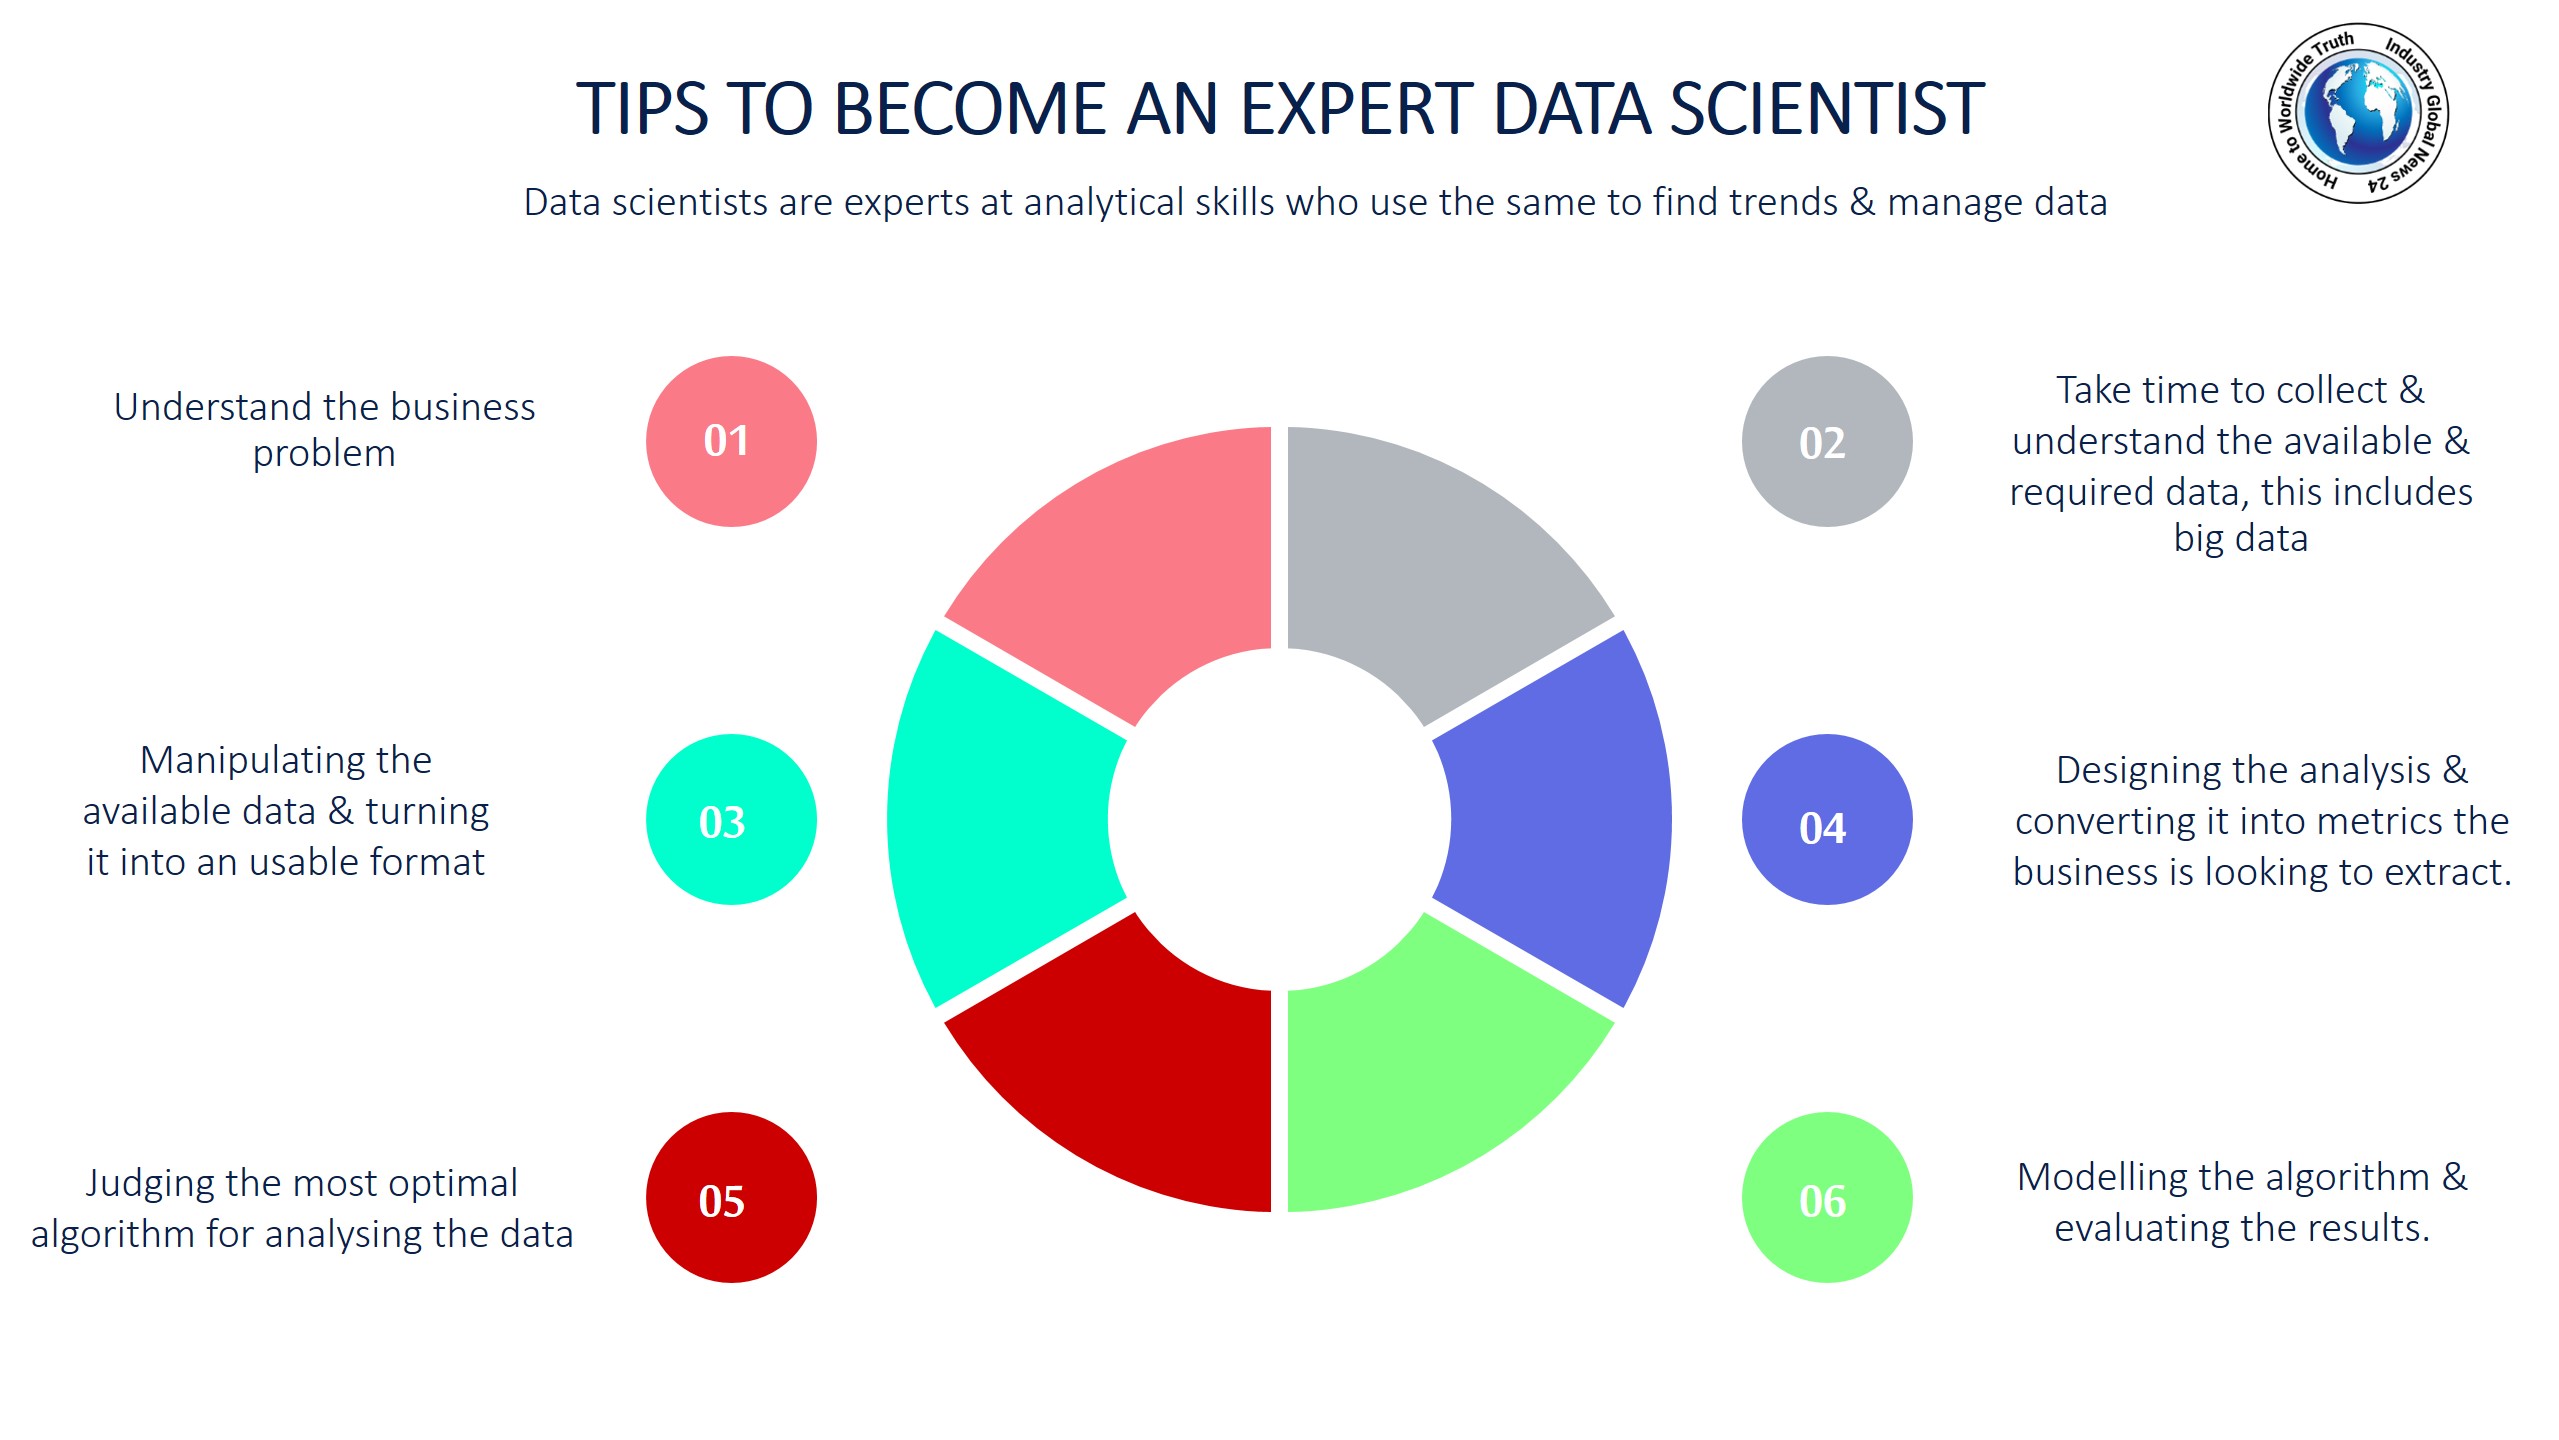 Tips to become an expert data scientist